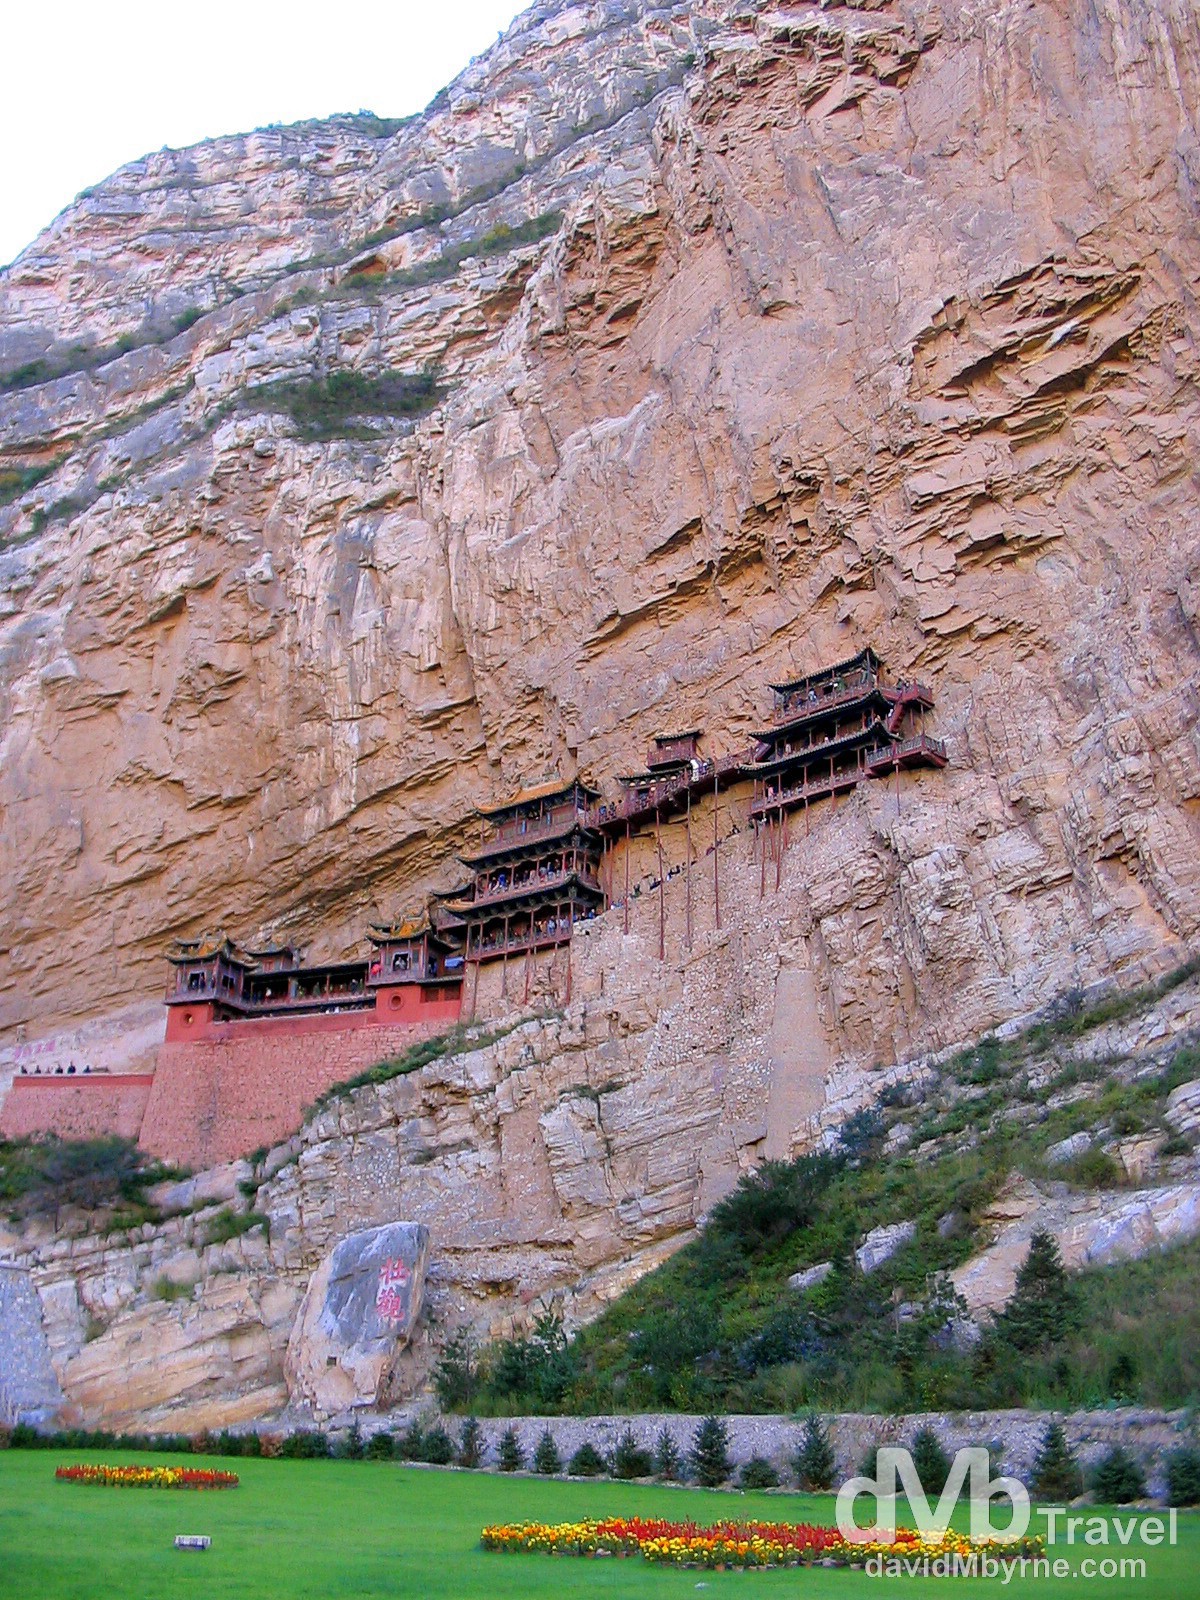 The Hanging Temple of HengShan (Heng Mountain), one of The Five Great Mountains of China. Shanxi province, Northern China. October 2nd, 2004.